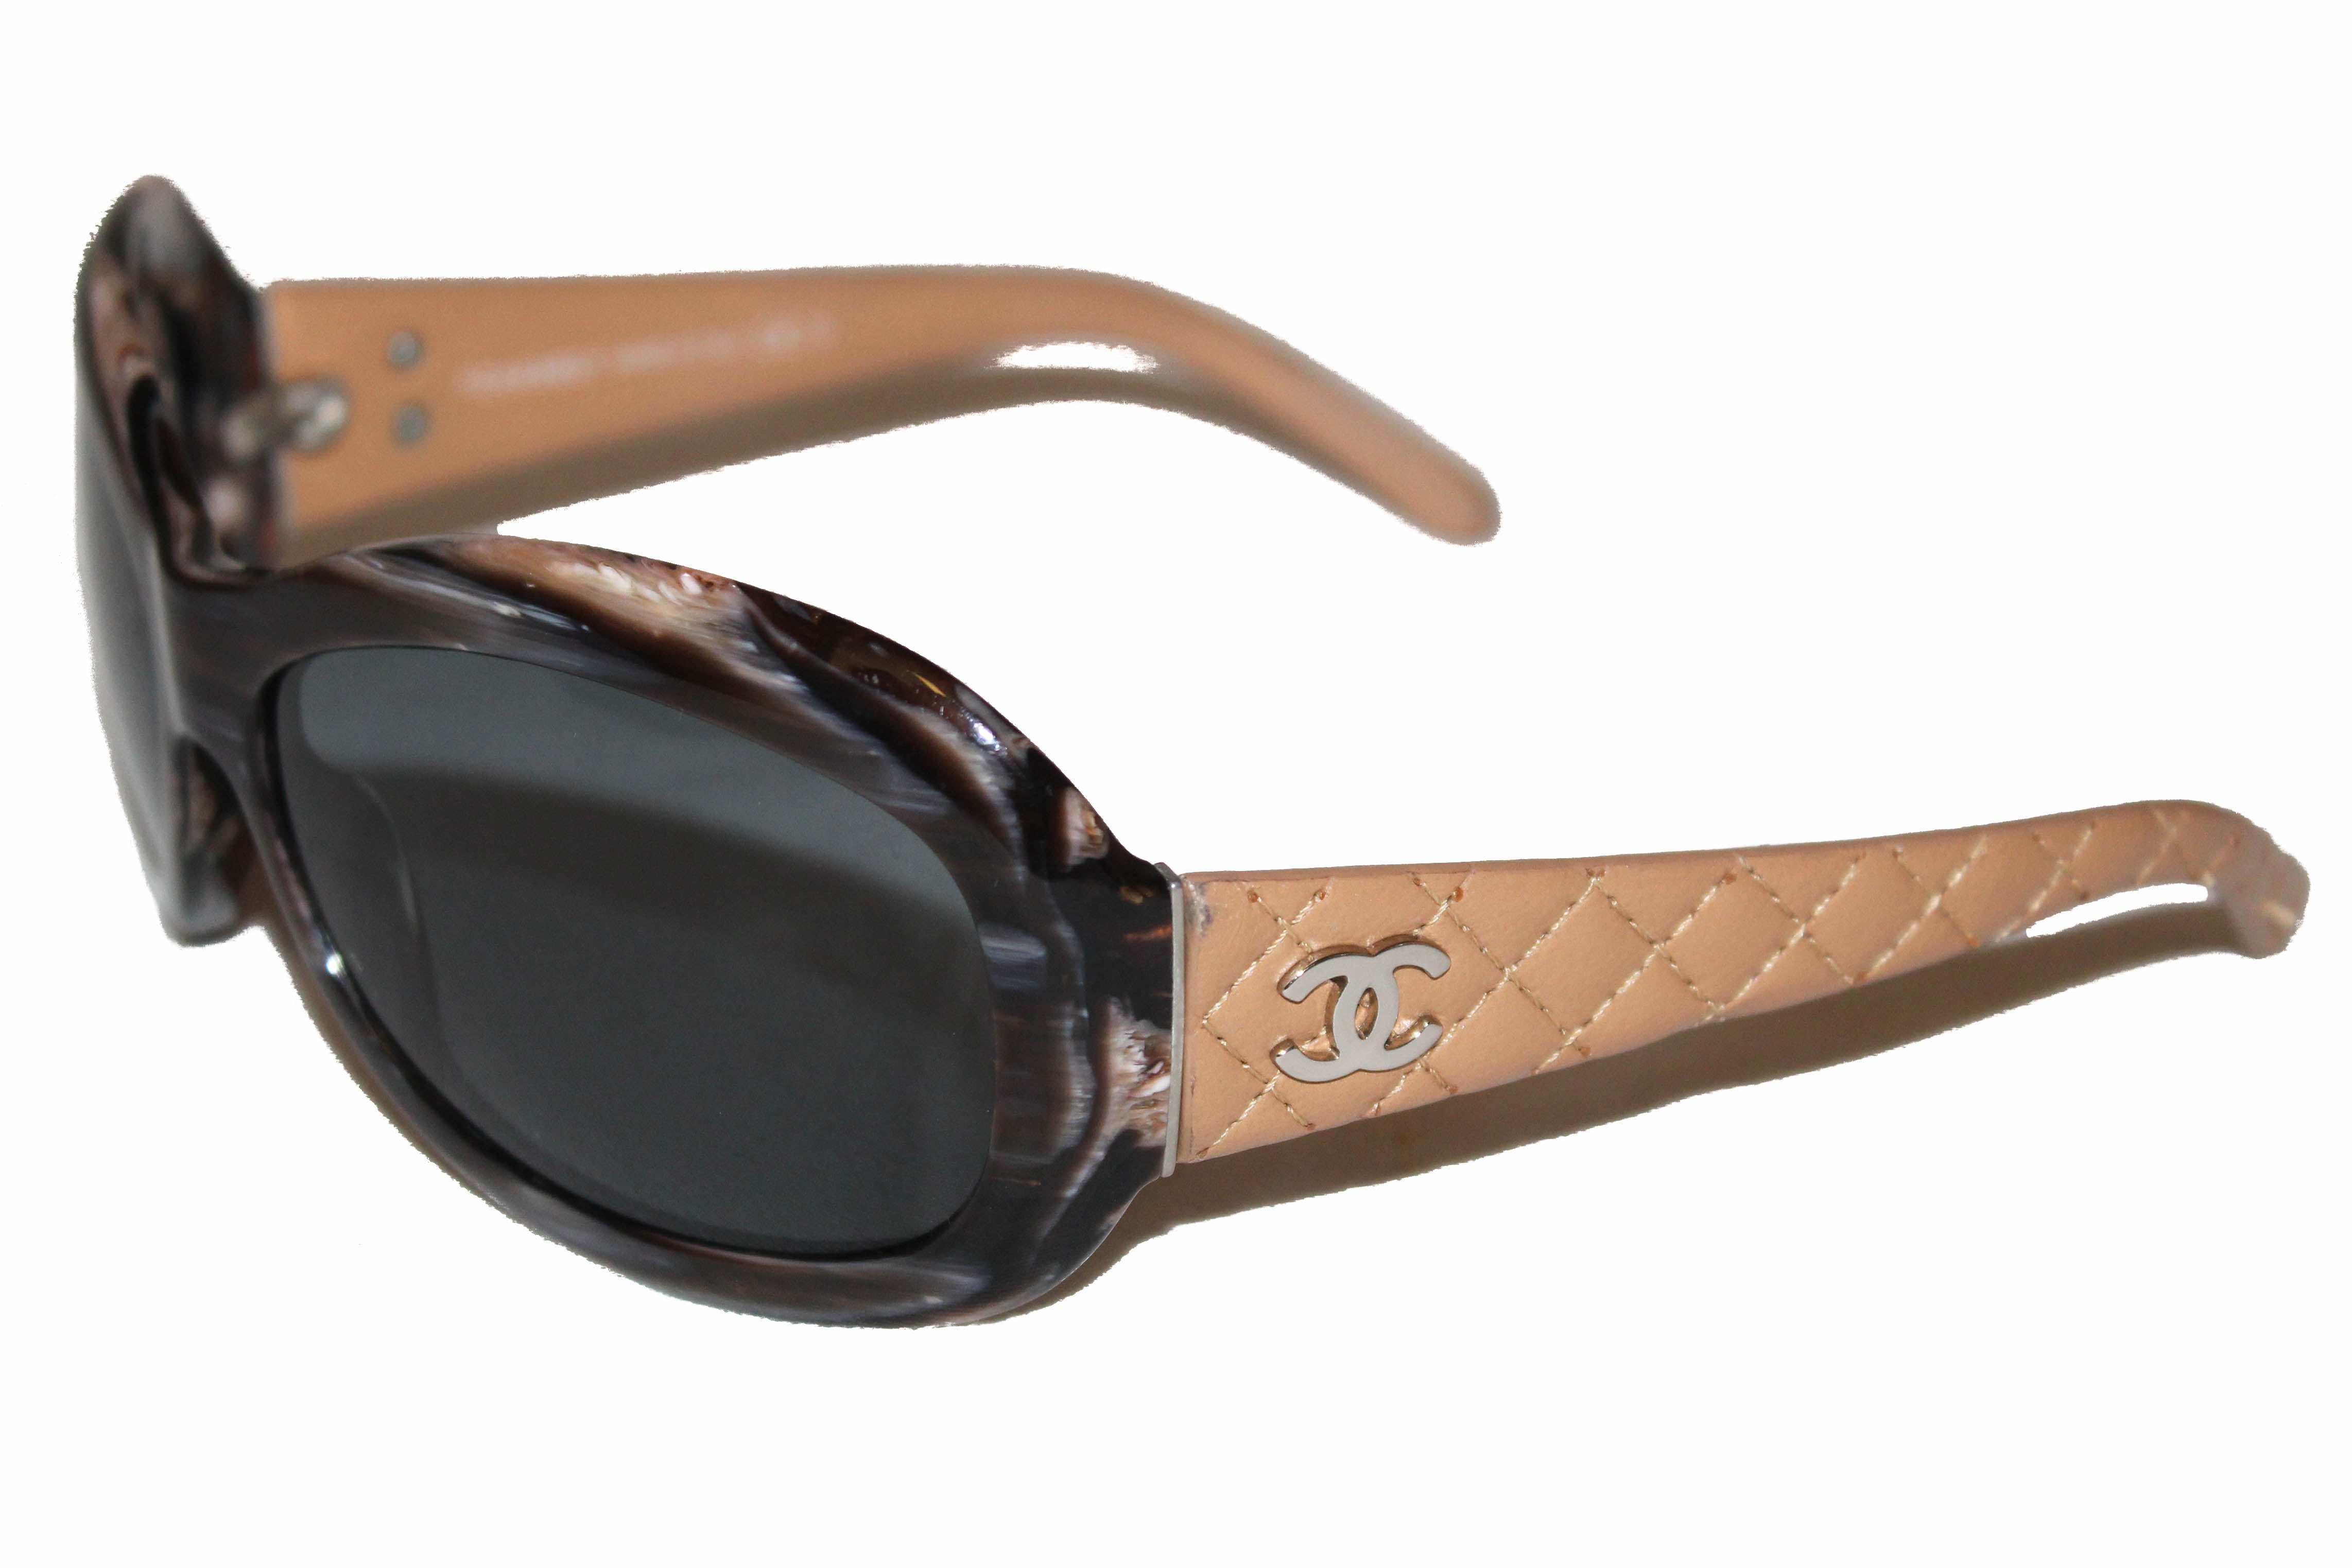 Authentic Chanel Beige Quilted Leather Sunglasses 5116-Q